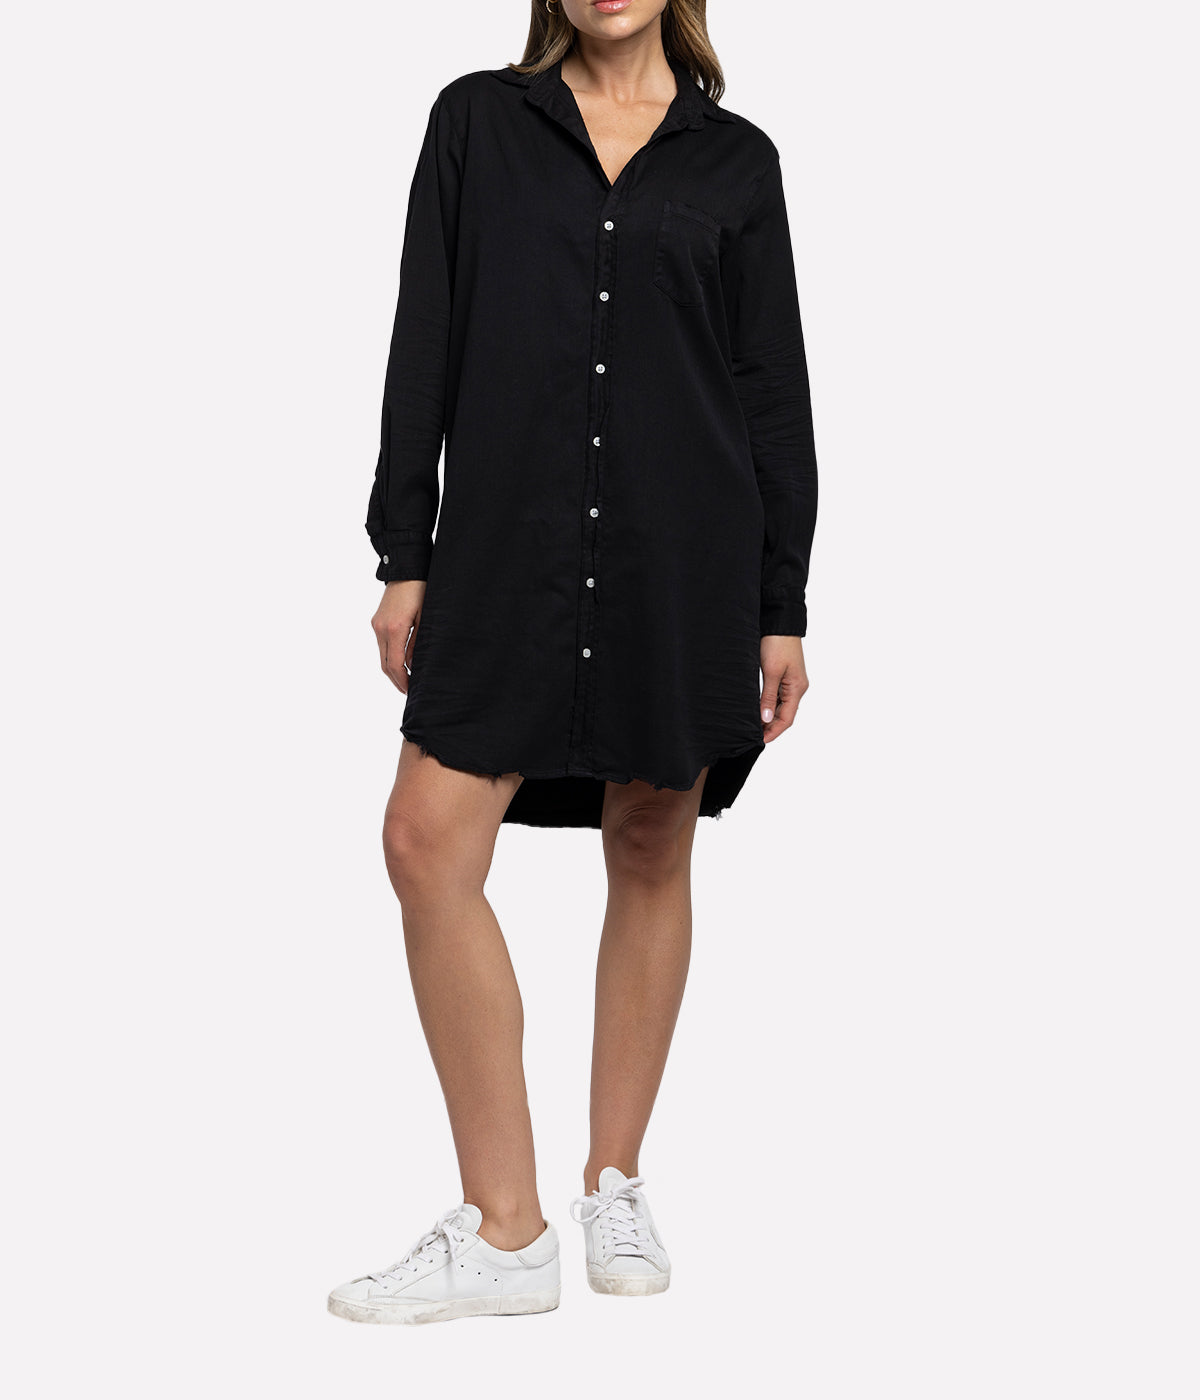 Mary Woven Denim Button Up Dress in Blackout